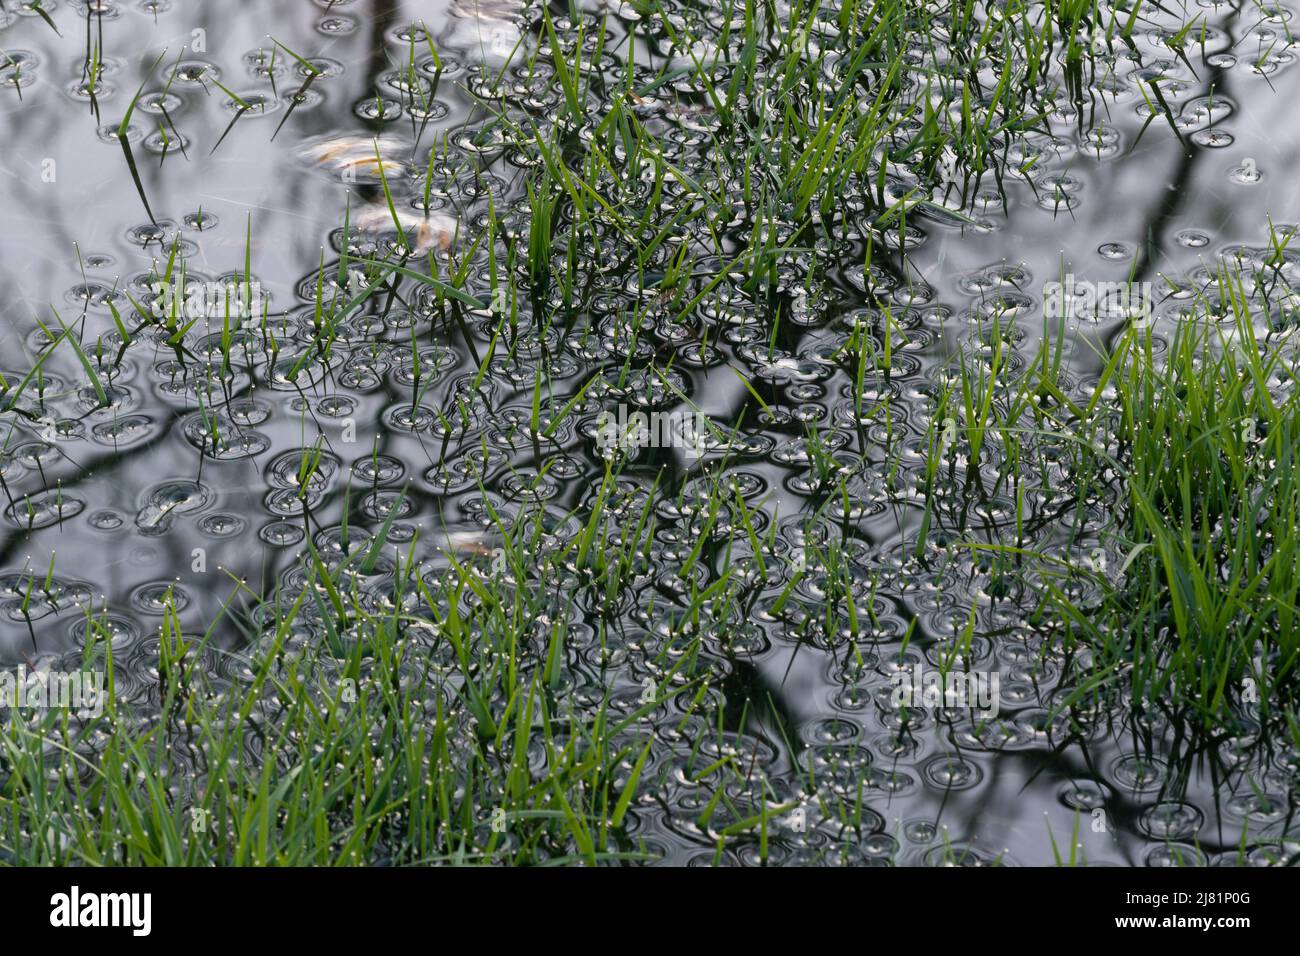 Surface tension around flooded grass blades close up, small water drops on grass tips Stock Photo